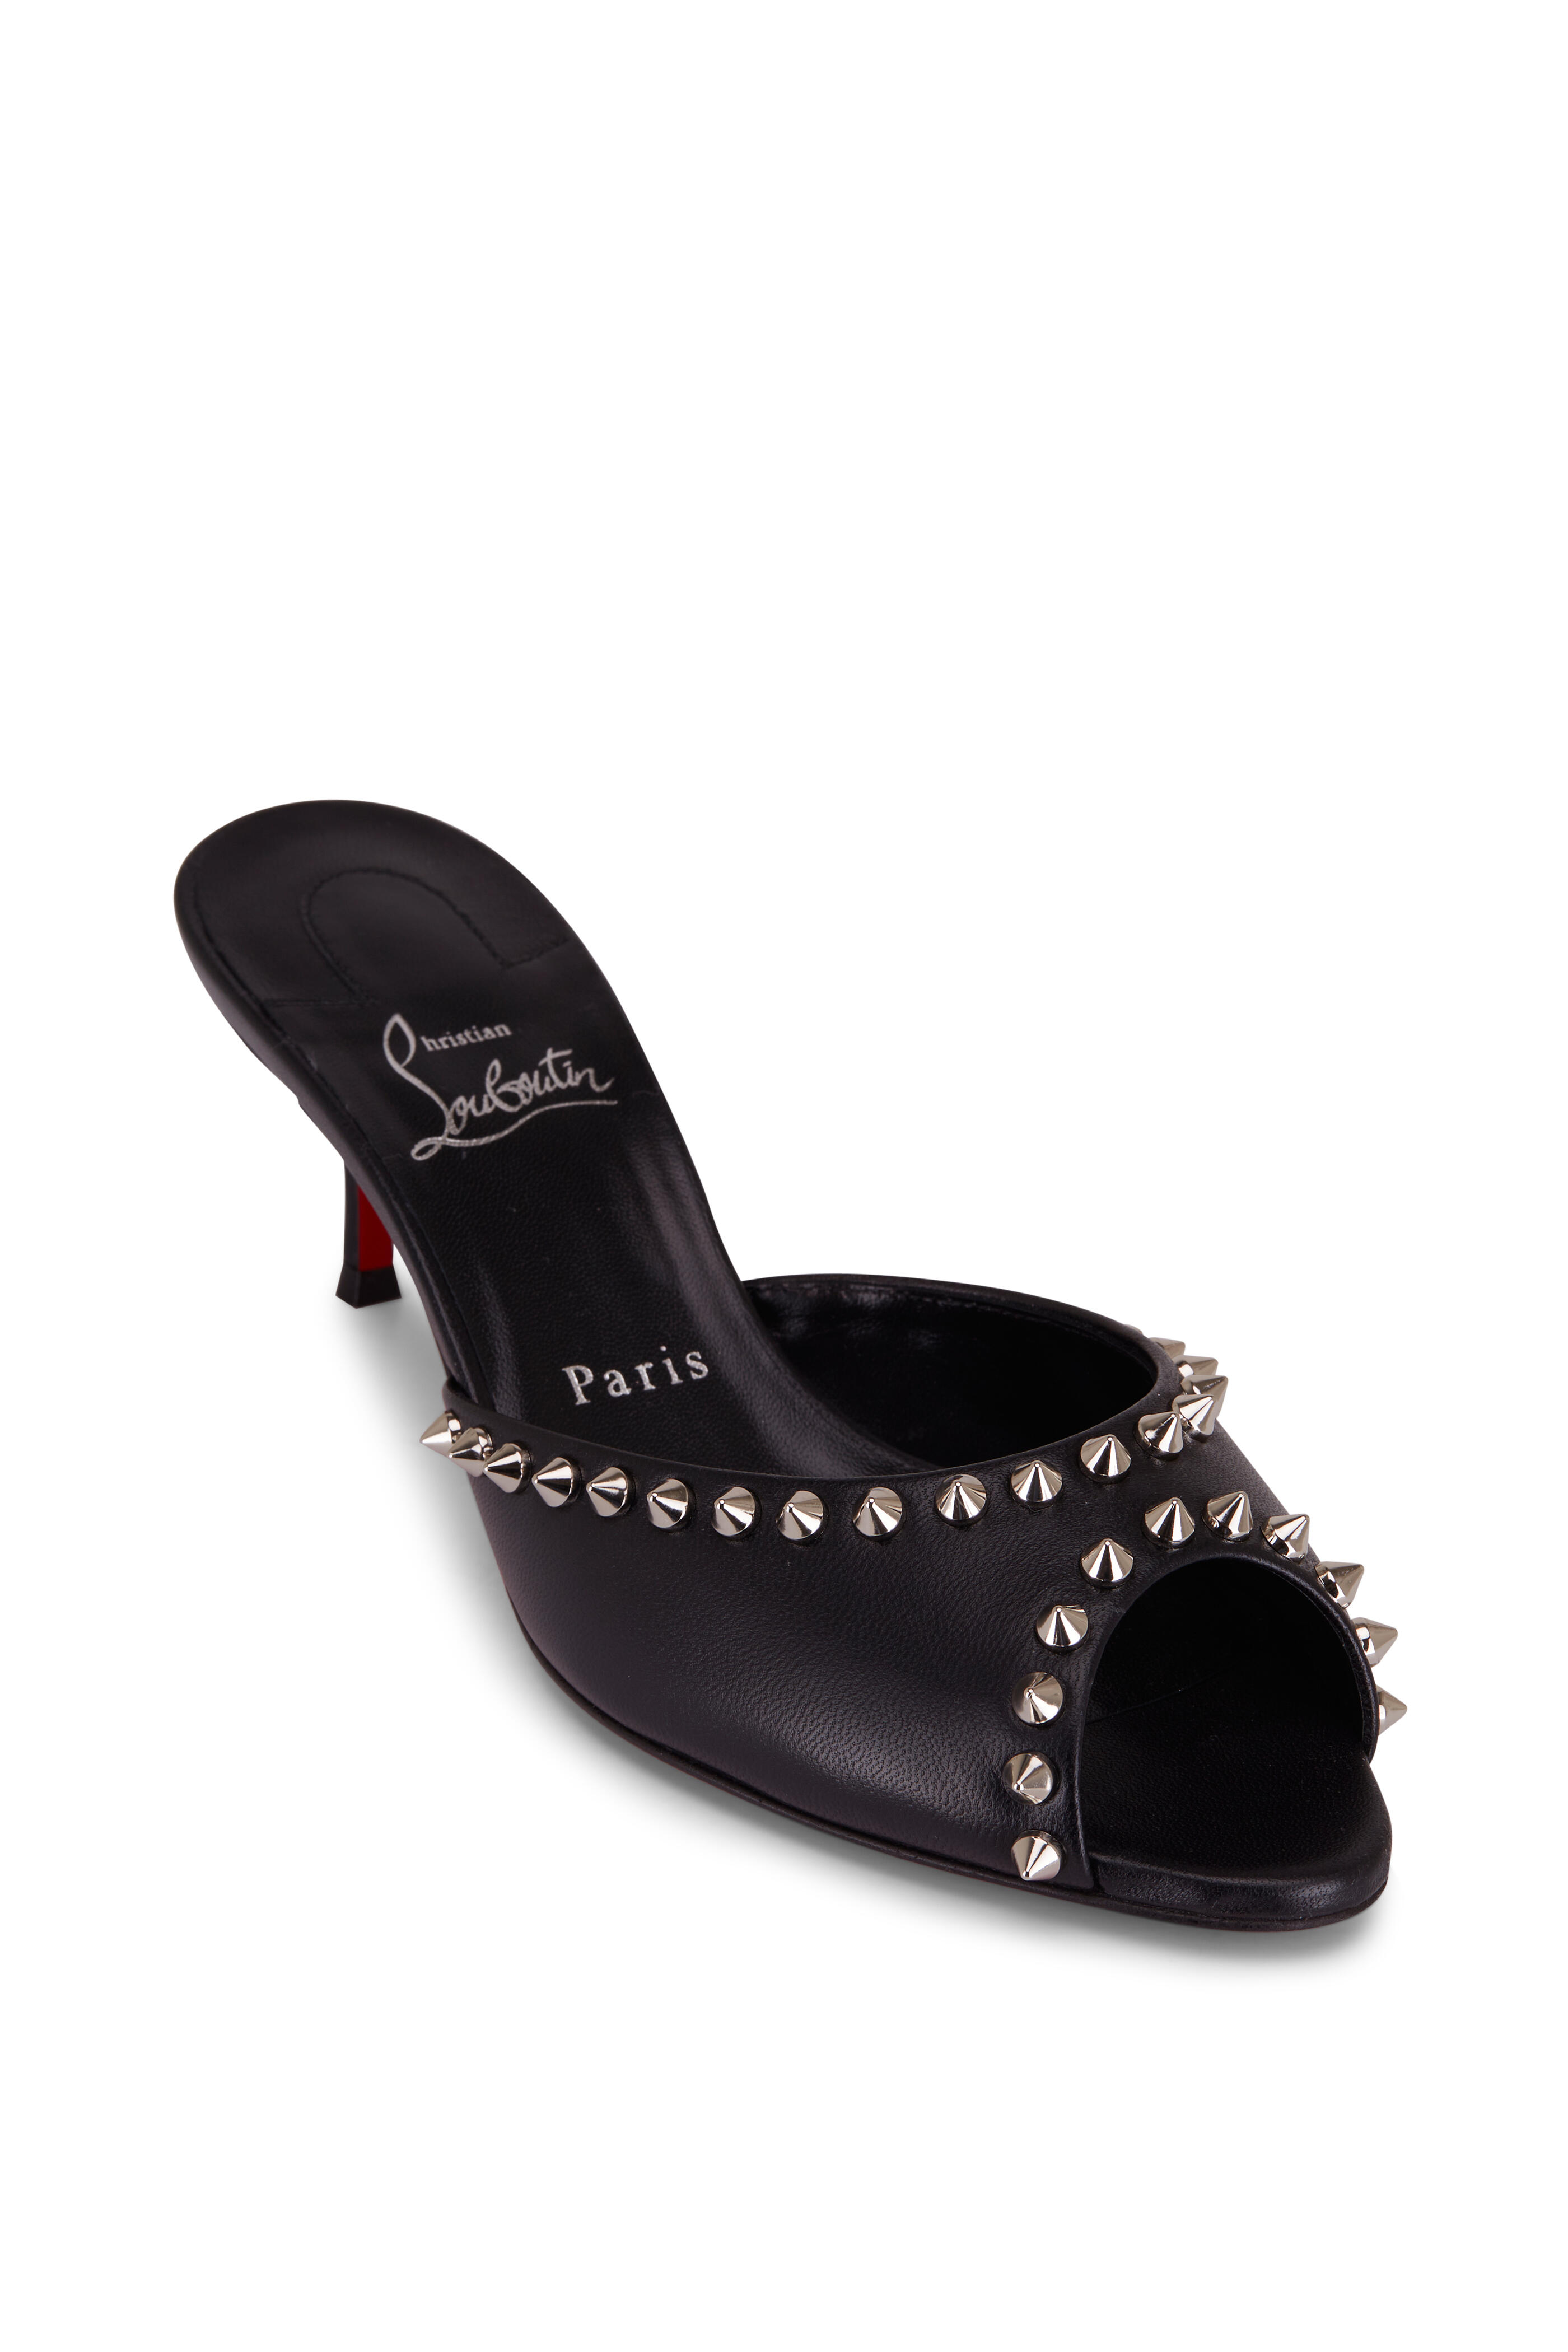 Christian Louboutin Studded High Heel Boots Leather Black silver